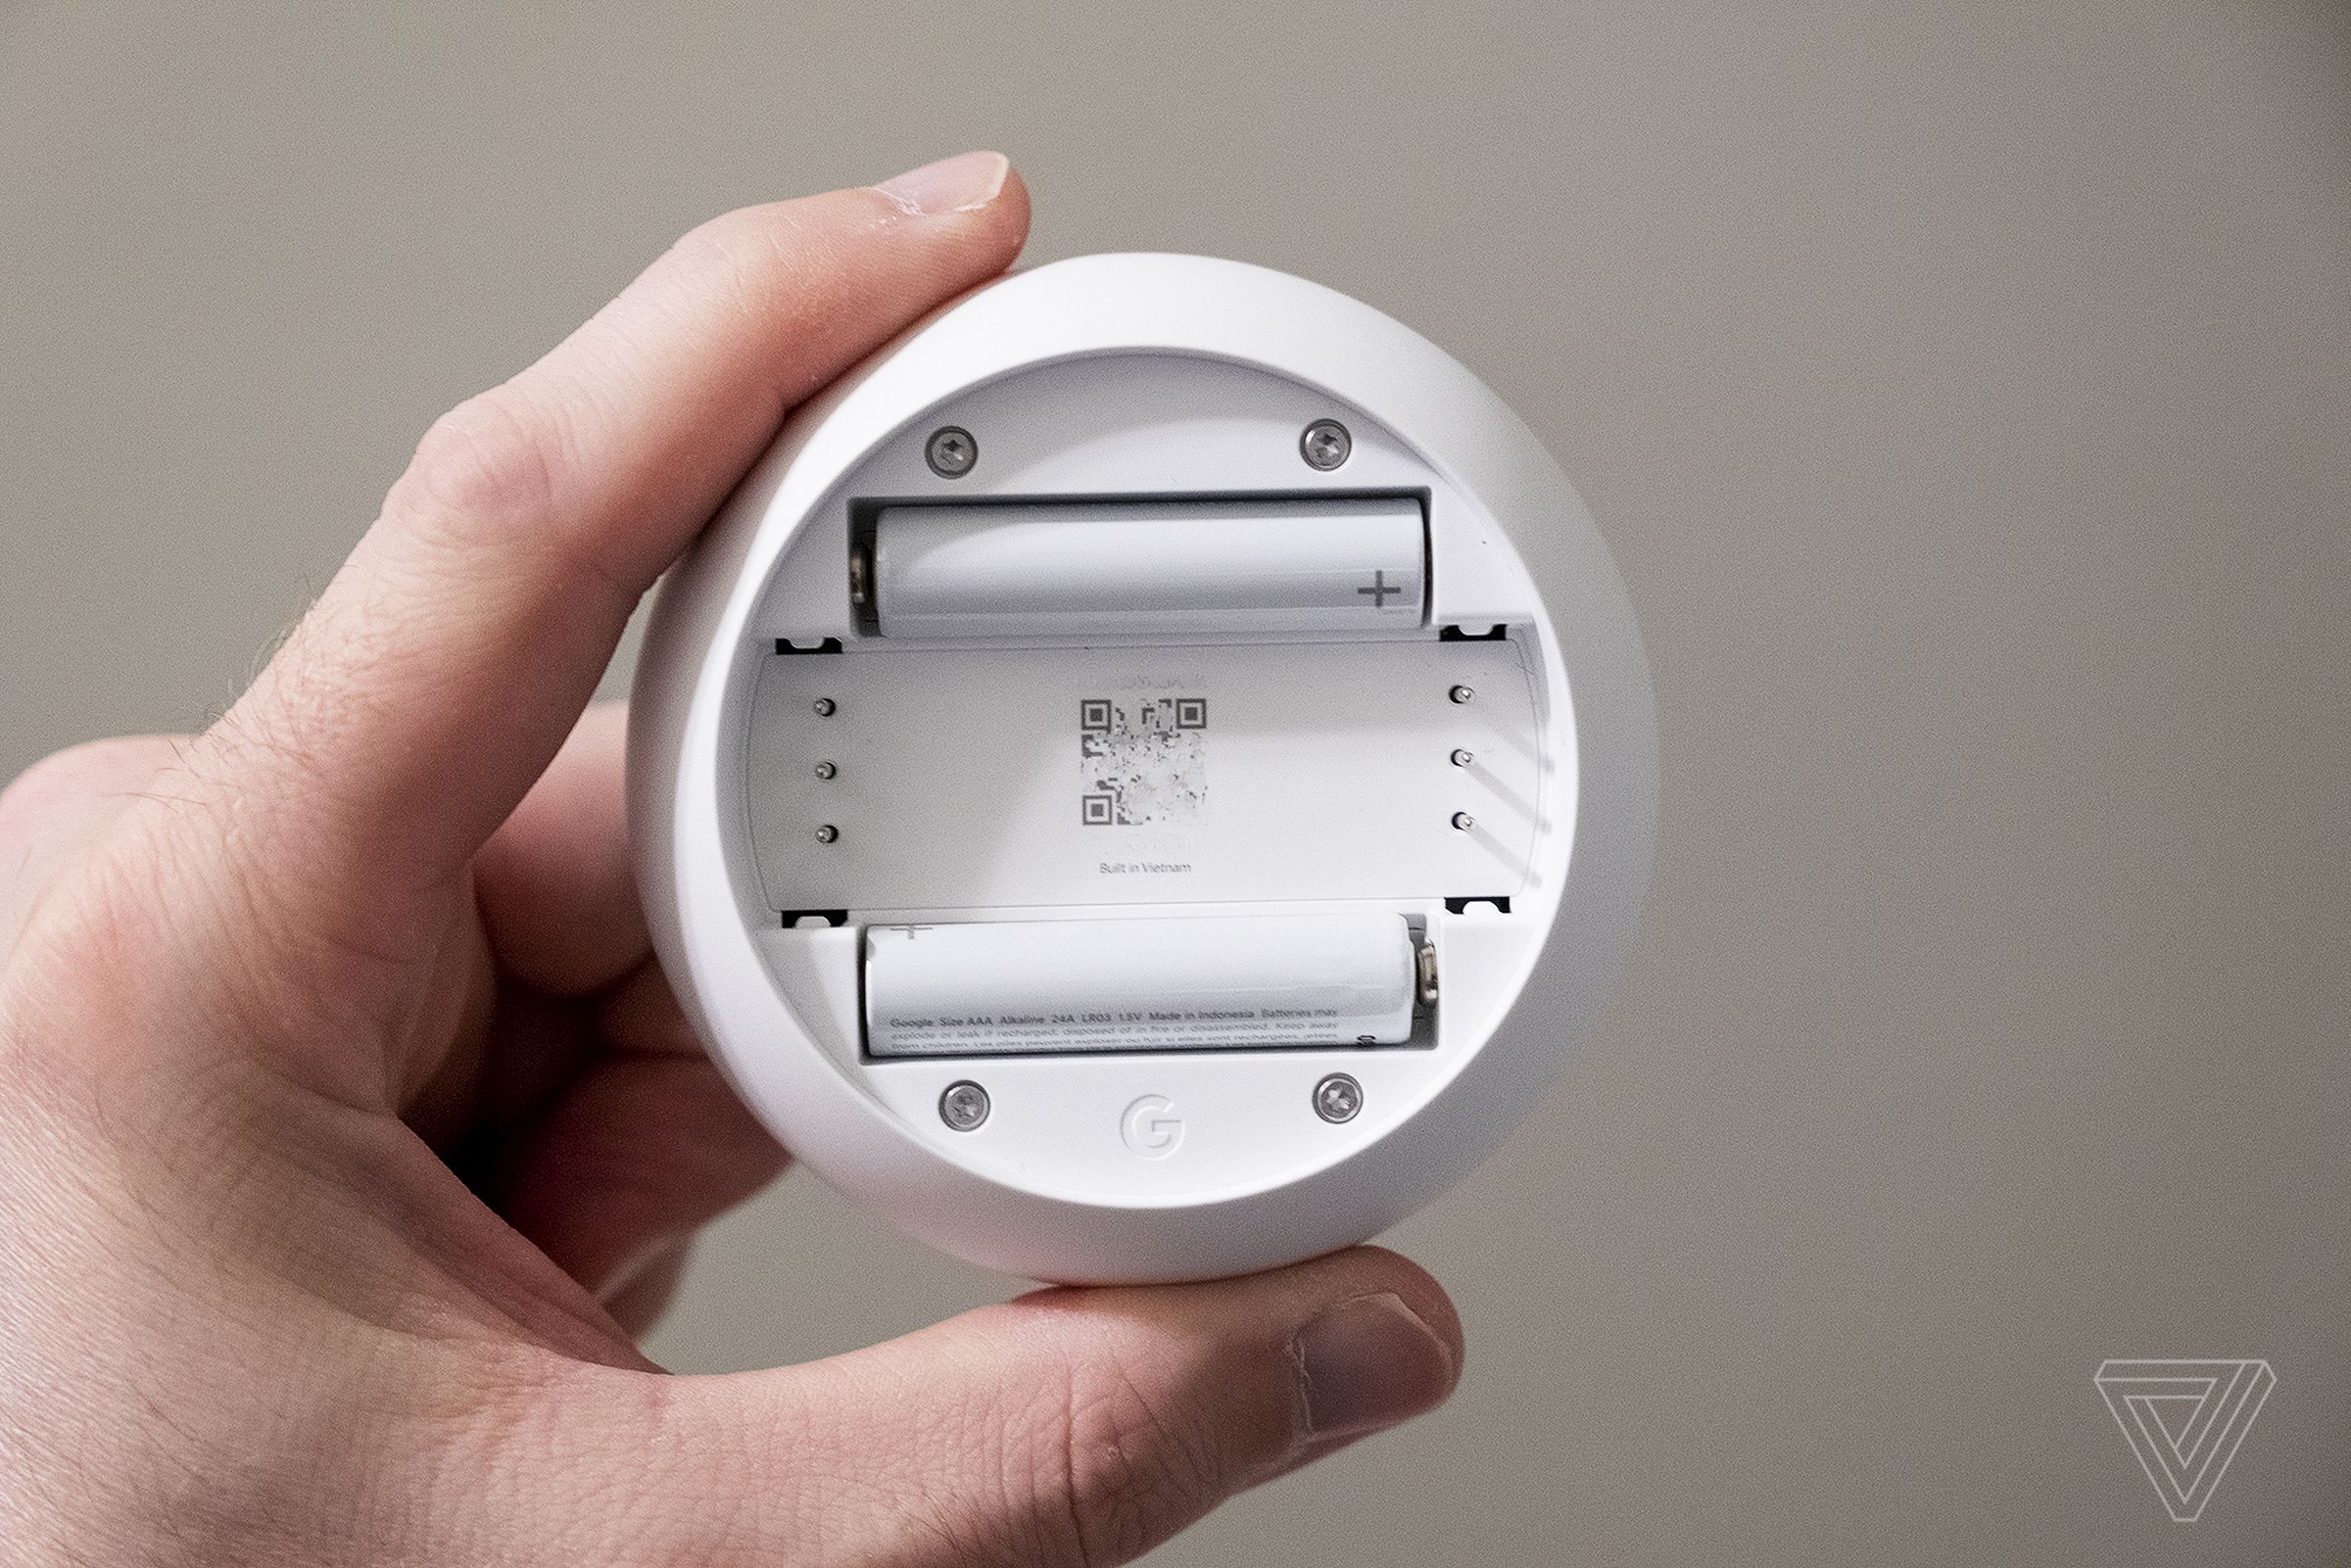 The Nest Thermostat uses AAA batteries instead of a built-in rechargeable one.